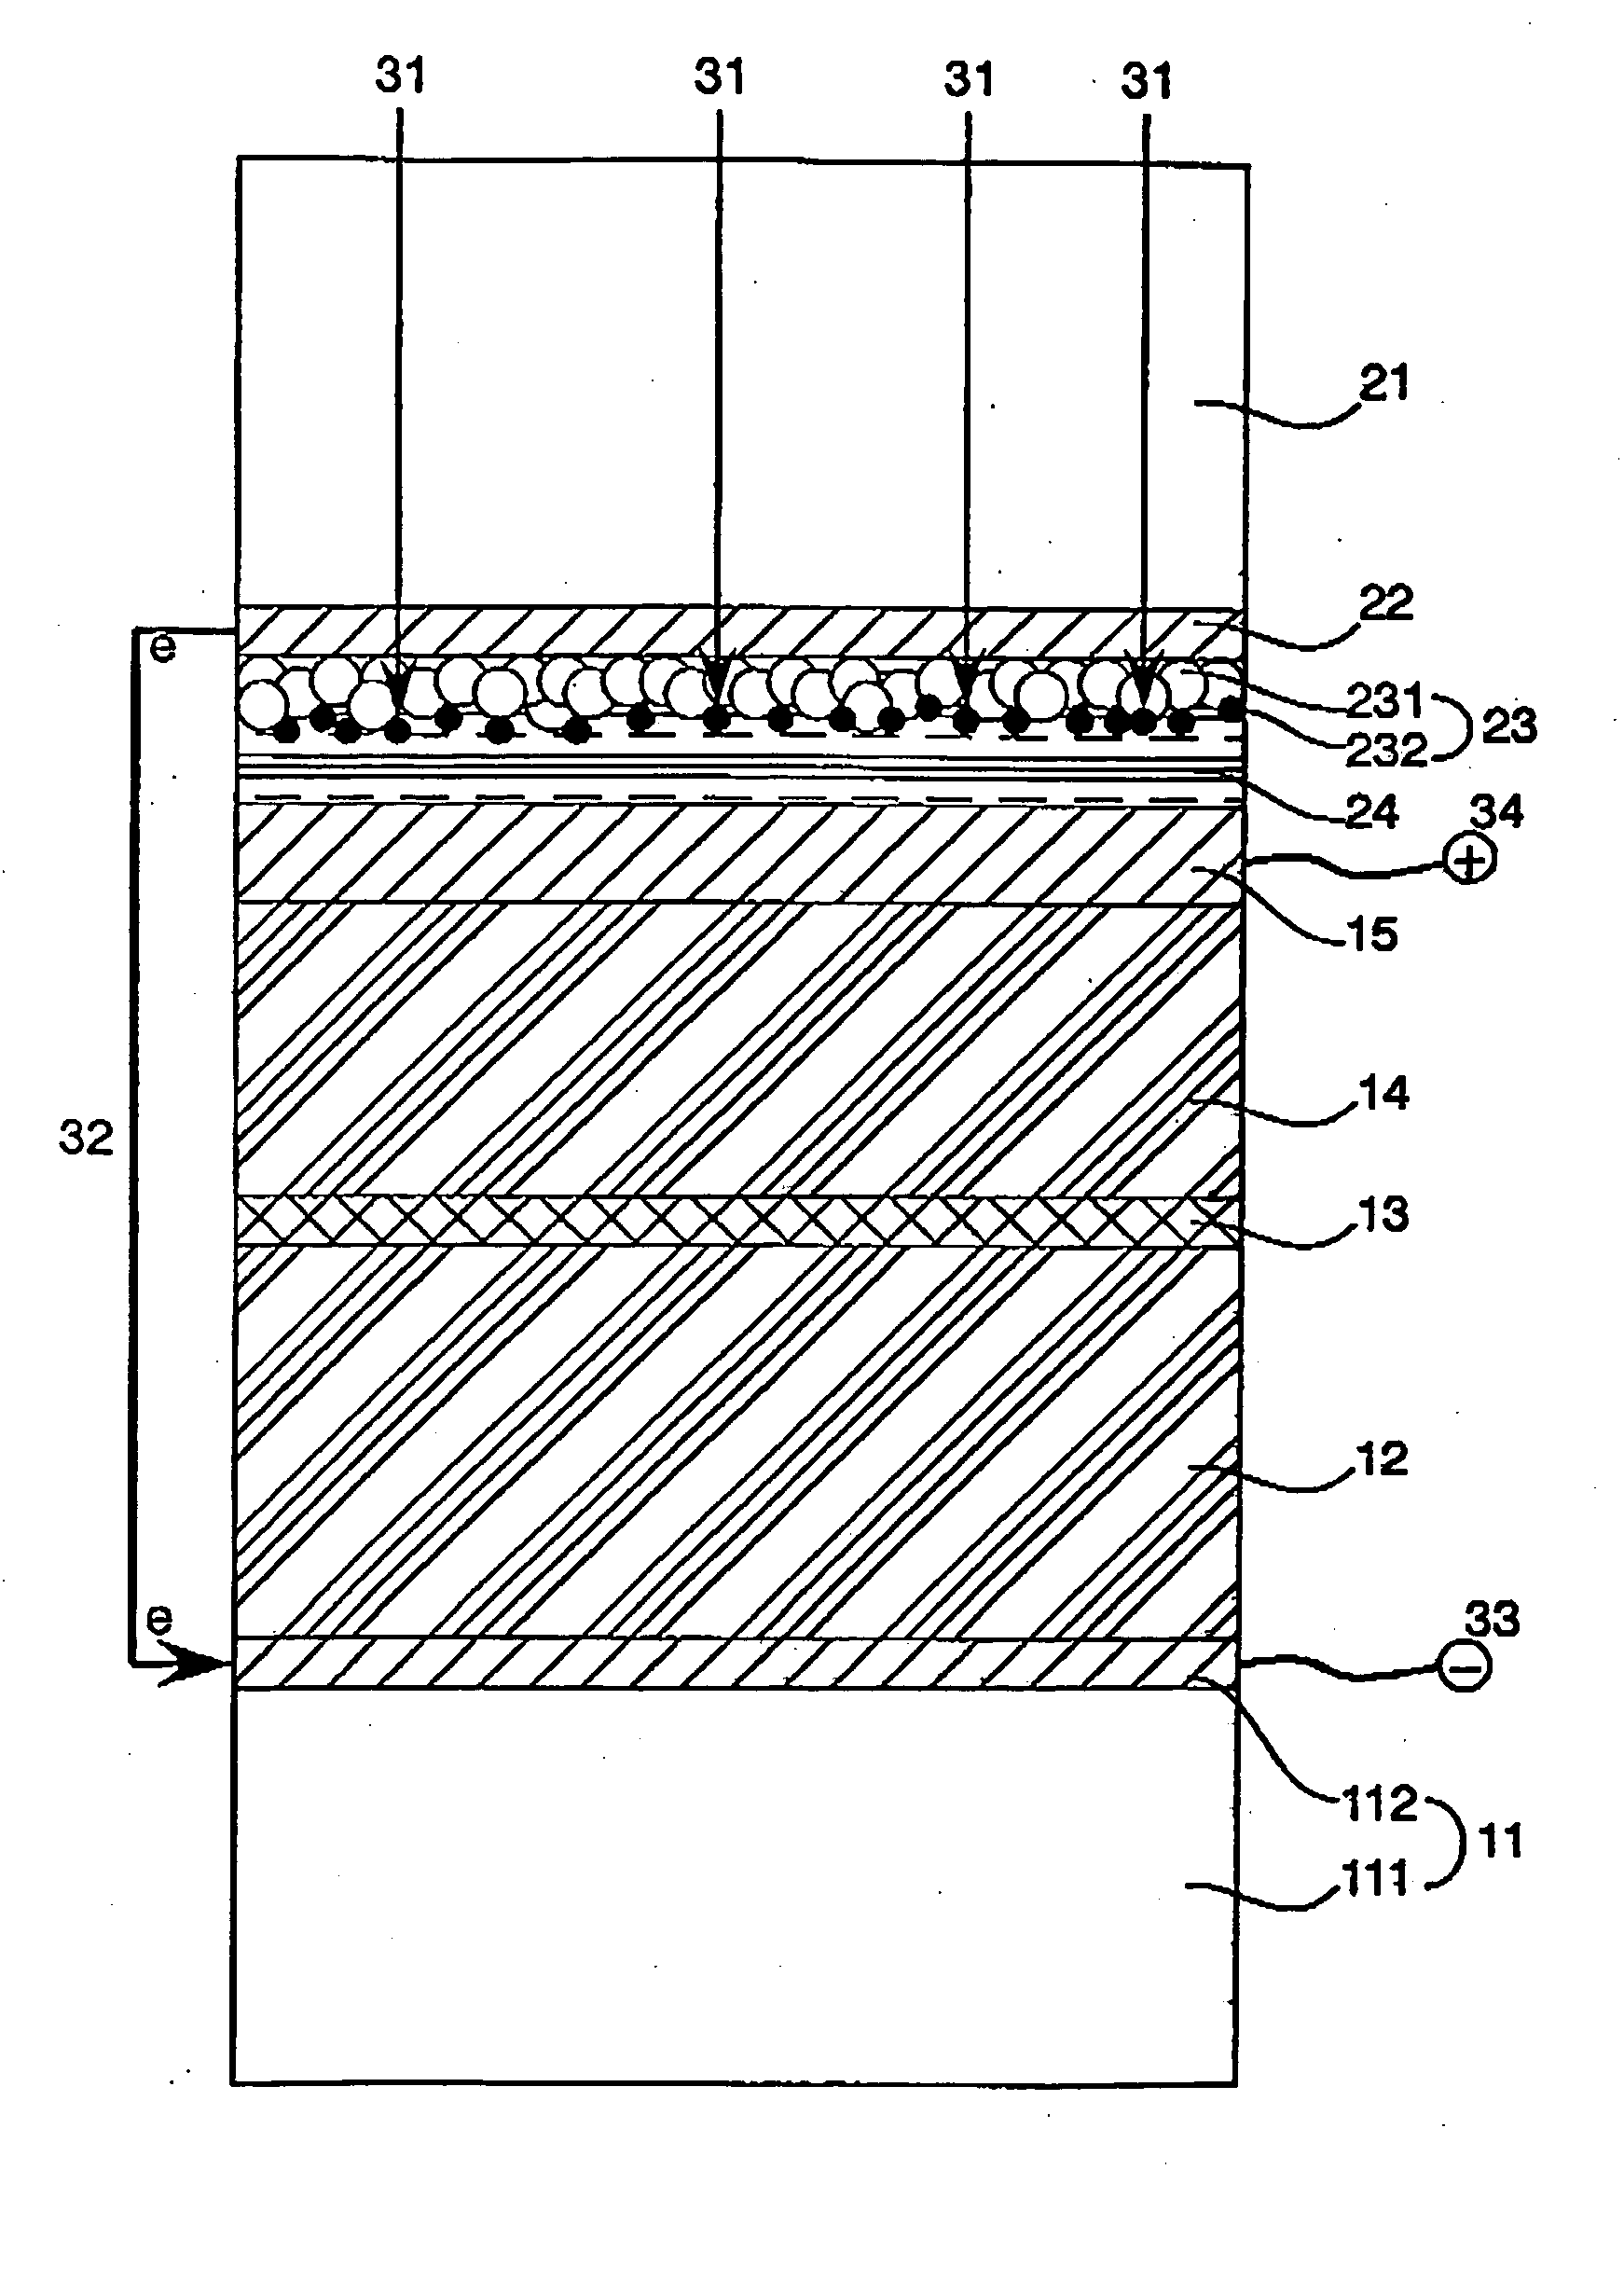 Photochargeable layered capacitor comprising photovoltaic electrode unit and layered capacitor unit